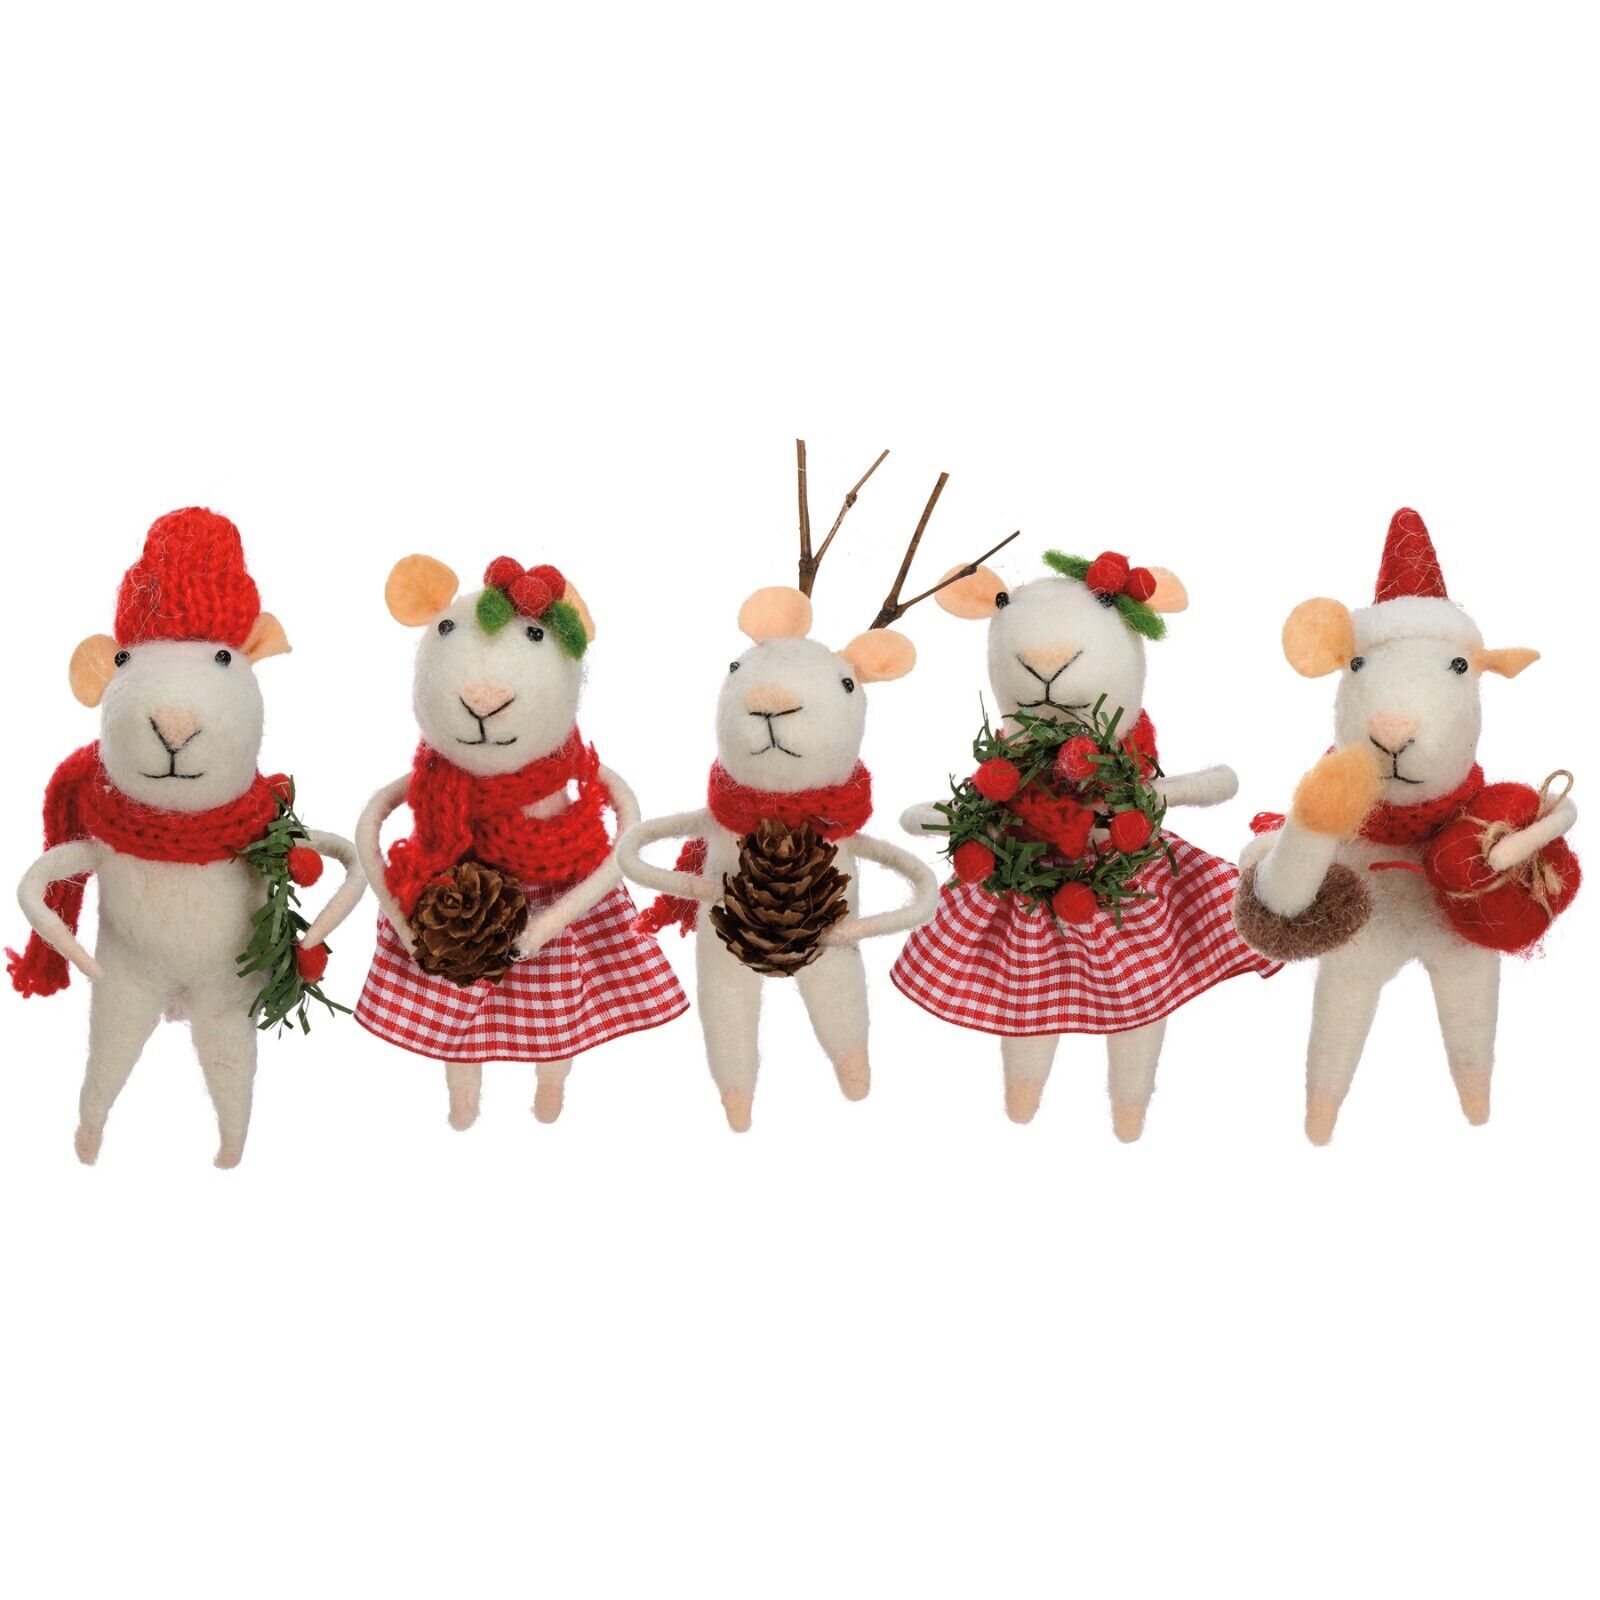 Primitives by Kathy Christmas Felt Mice Set of 5 Critter Holiday Mouse Ornament